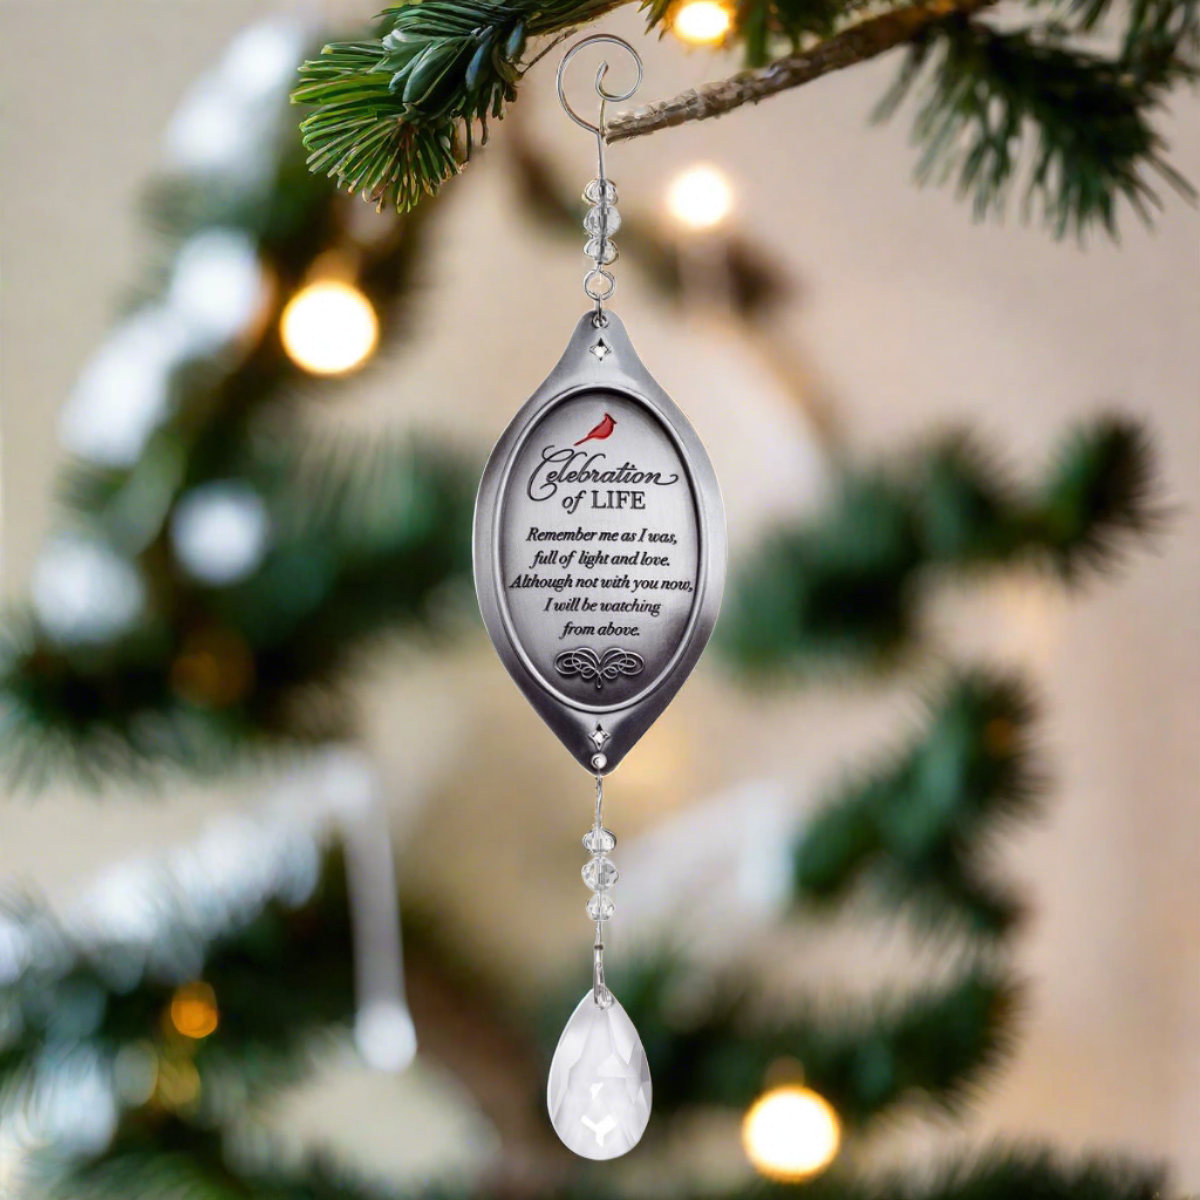 Celebration of Life ornament hanging from a Christmas tree.